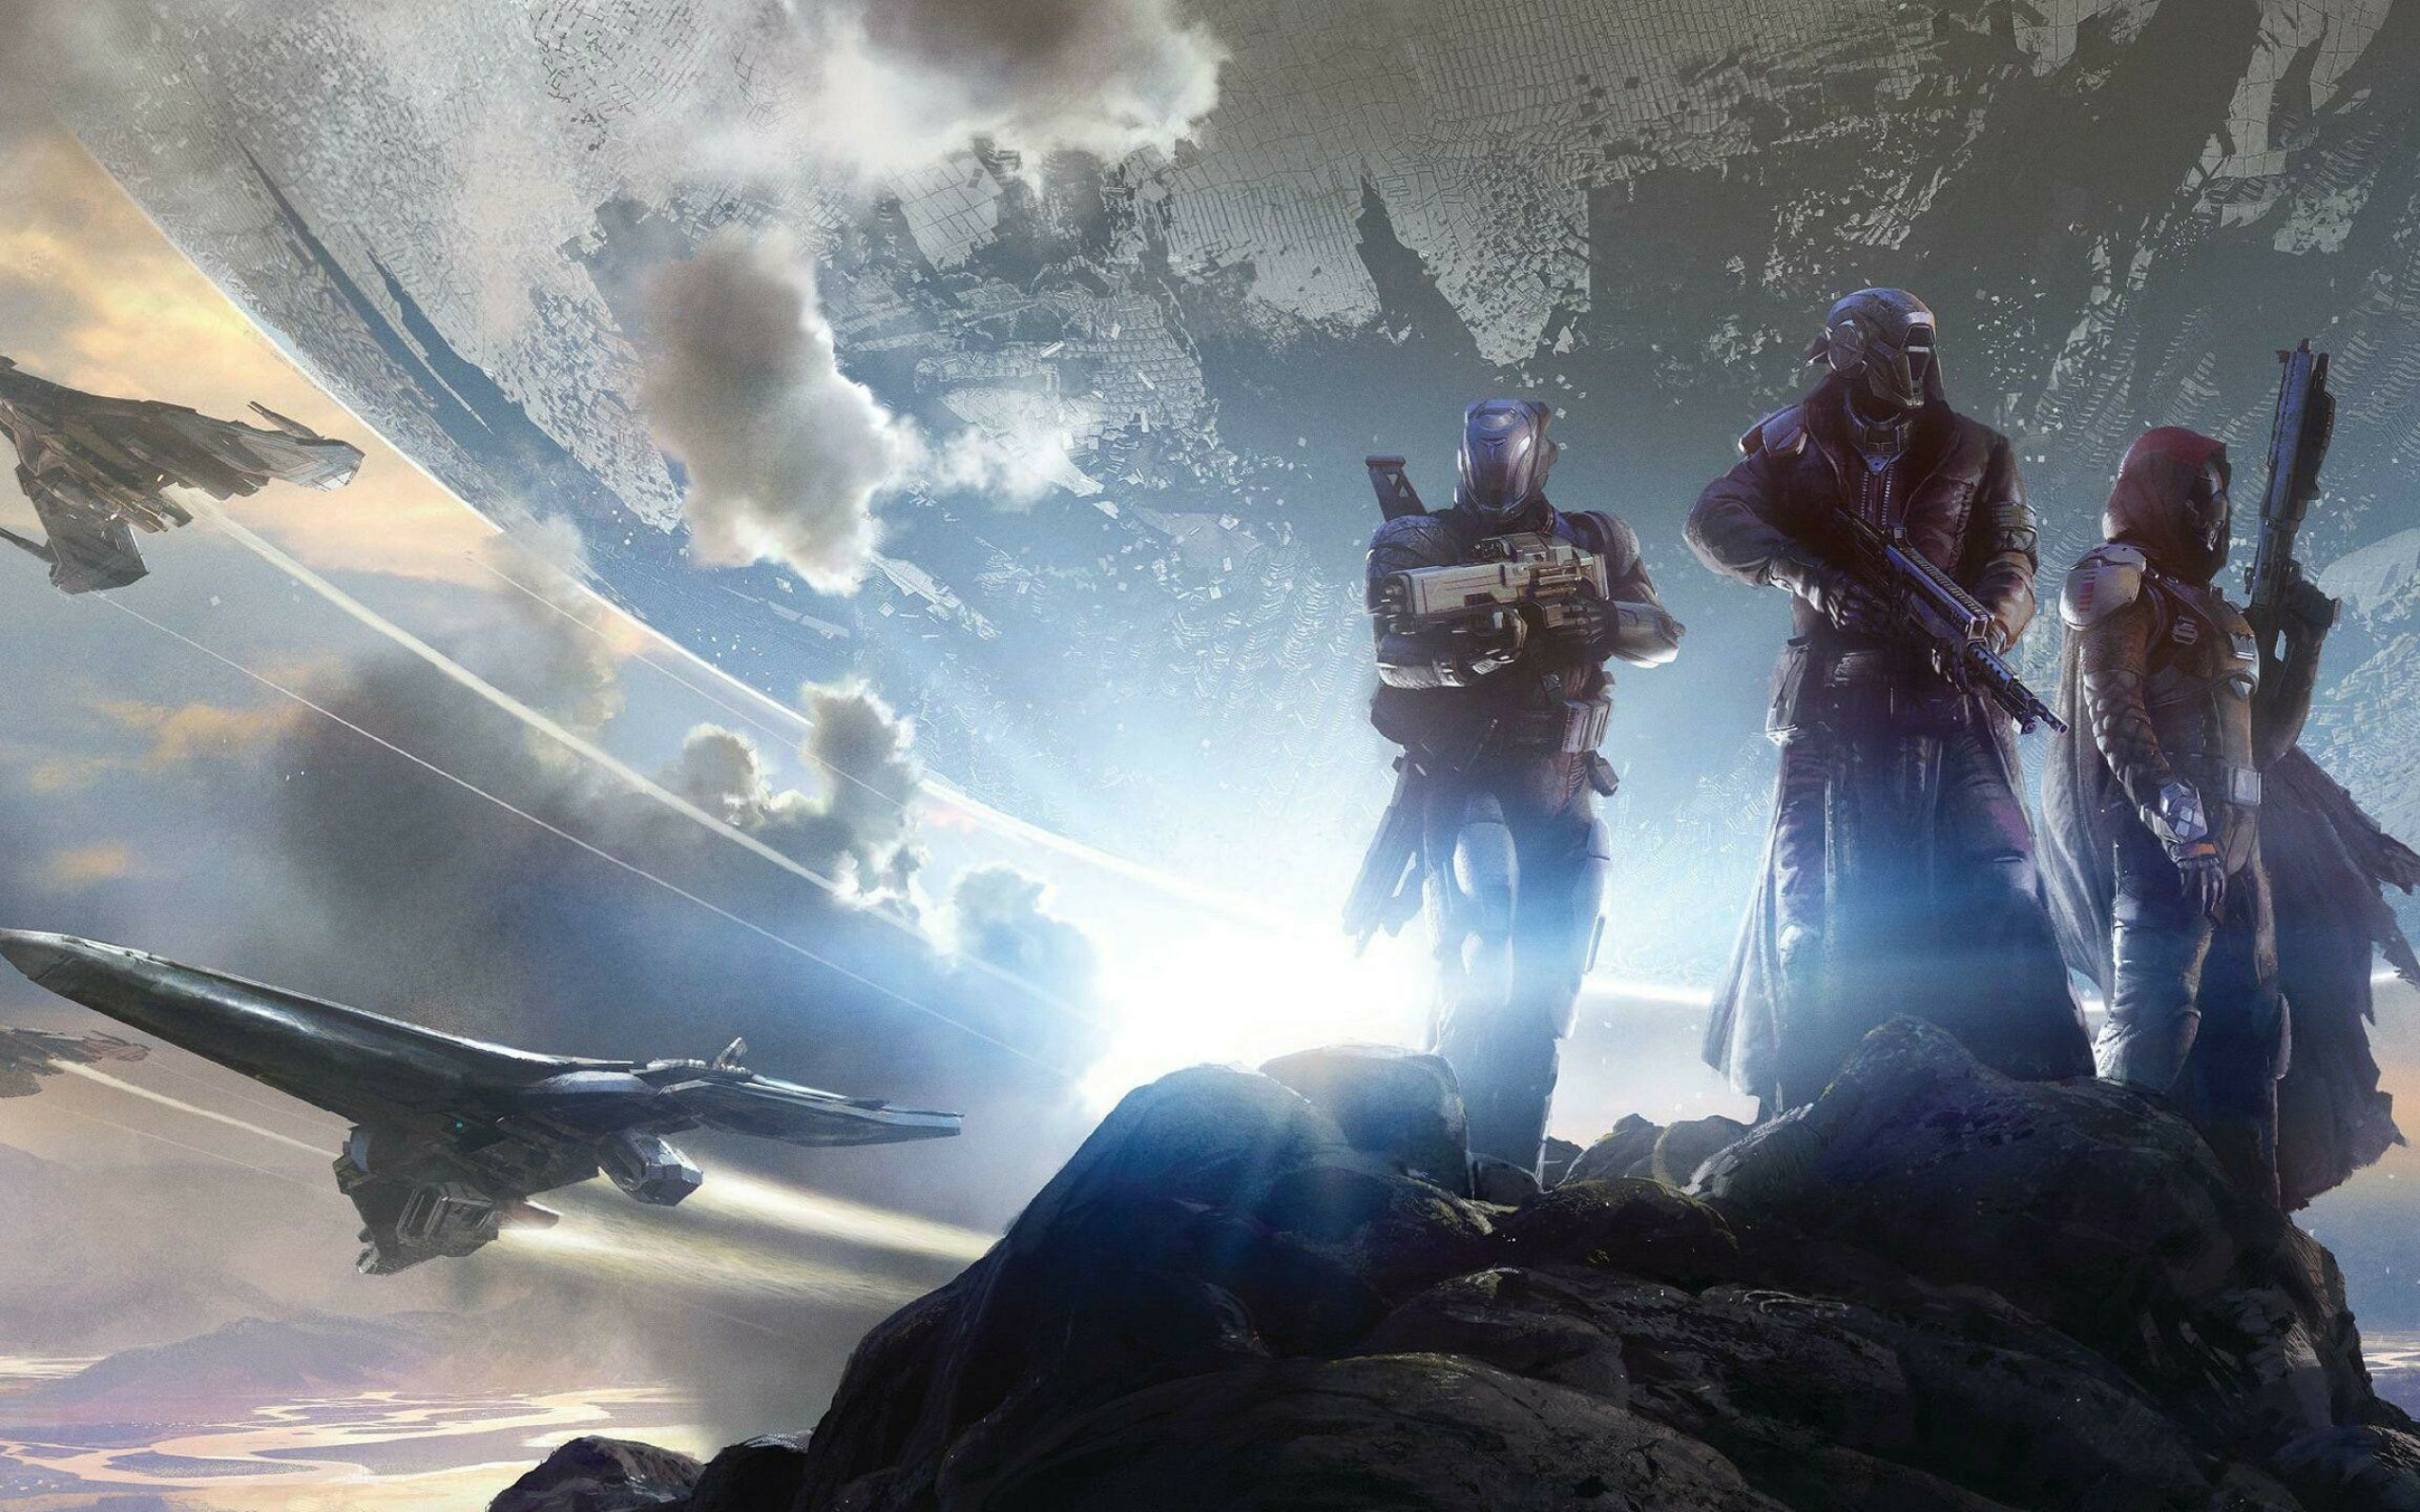 Destiny: The game's style has been described as a first-person shooter that incorporates role-playing and MMO elements, but Bungie has avoided describing Destiny as a traditional MMO game. 2560x1600 HD Wallpaper.